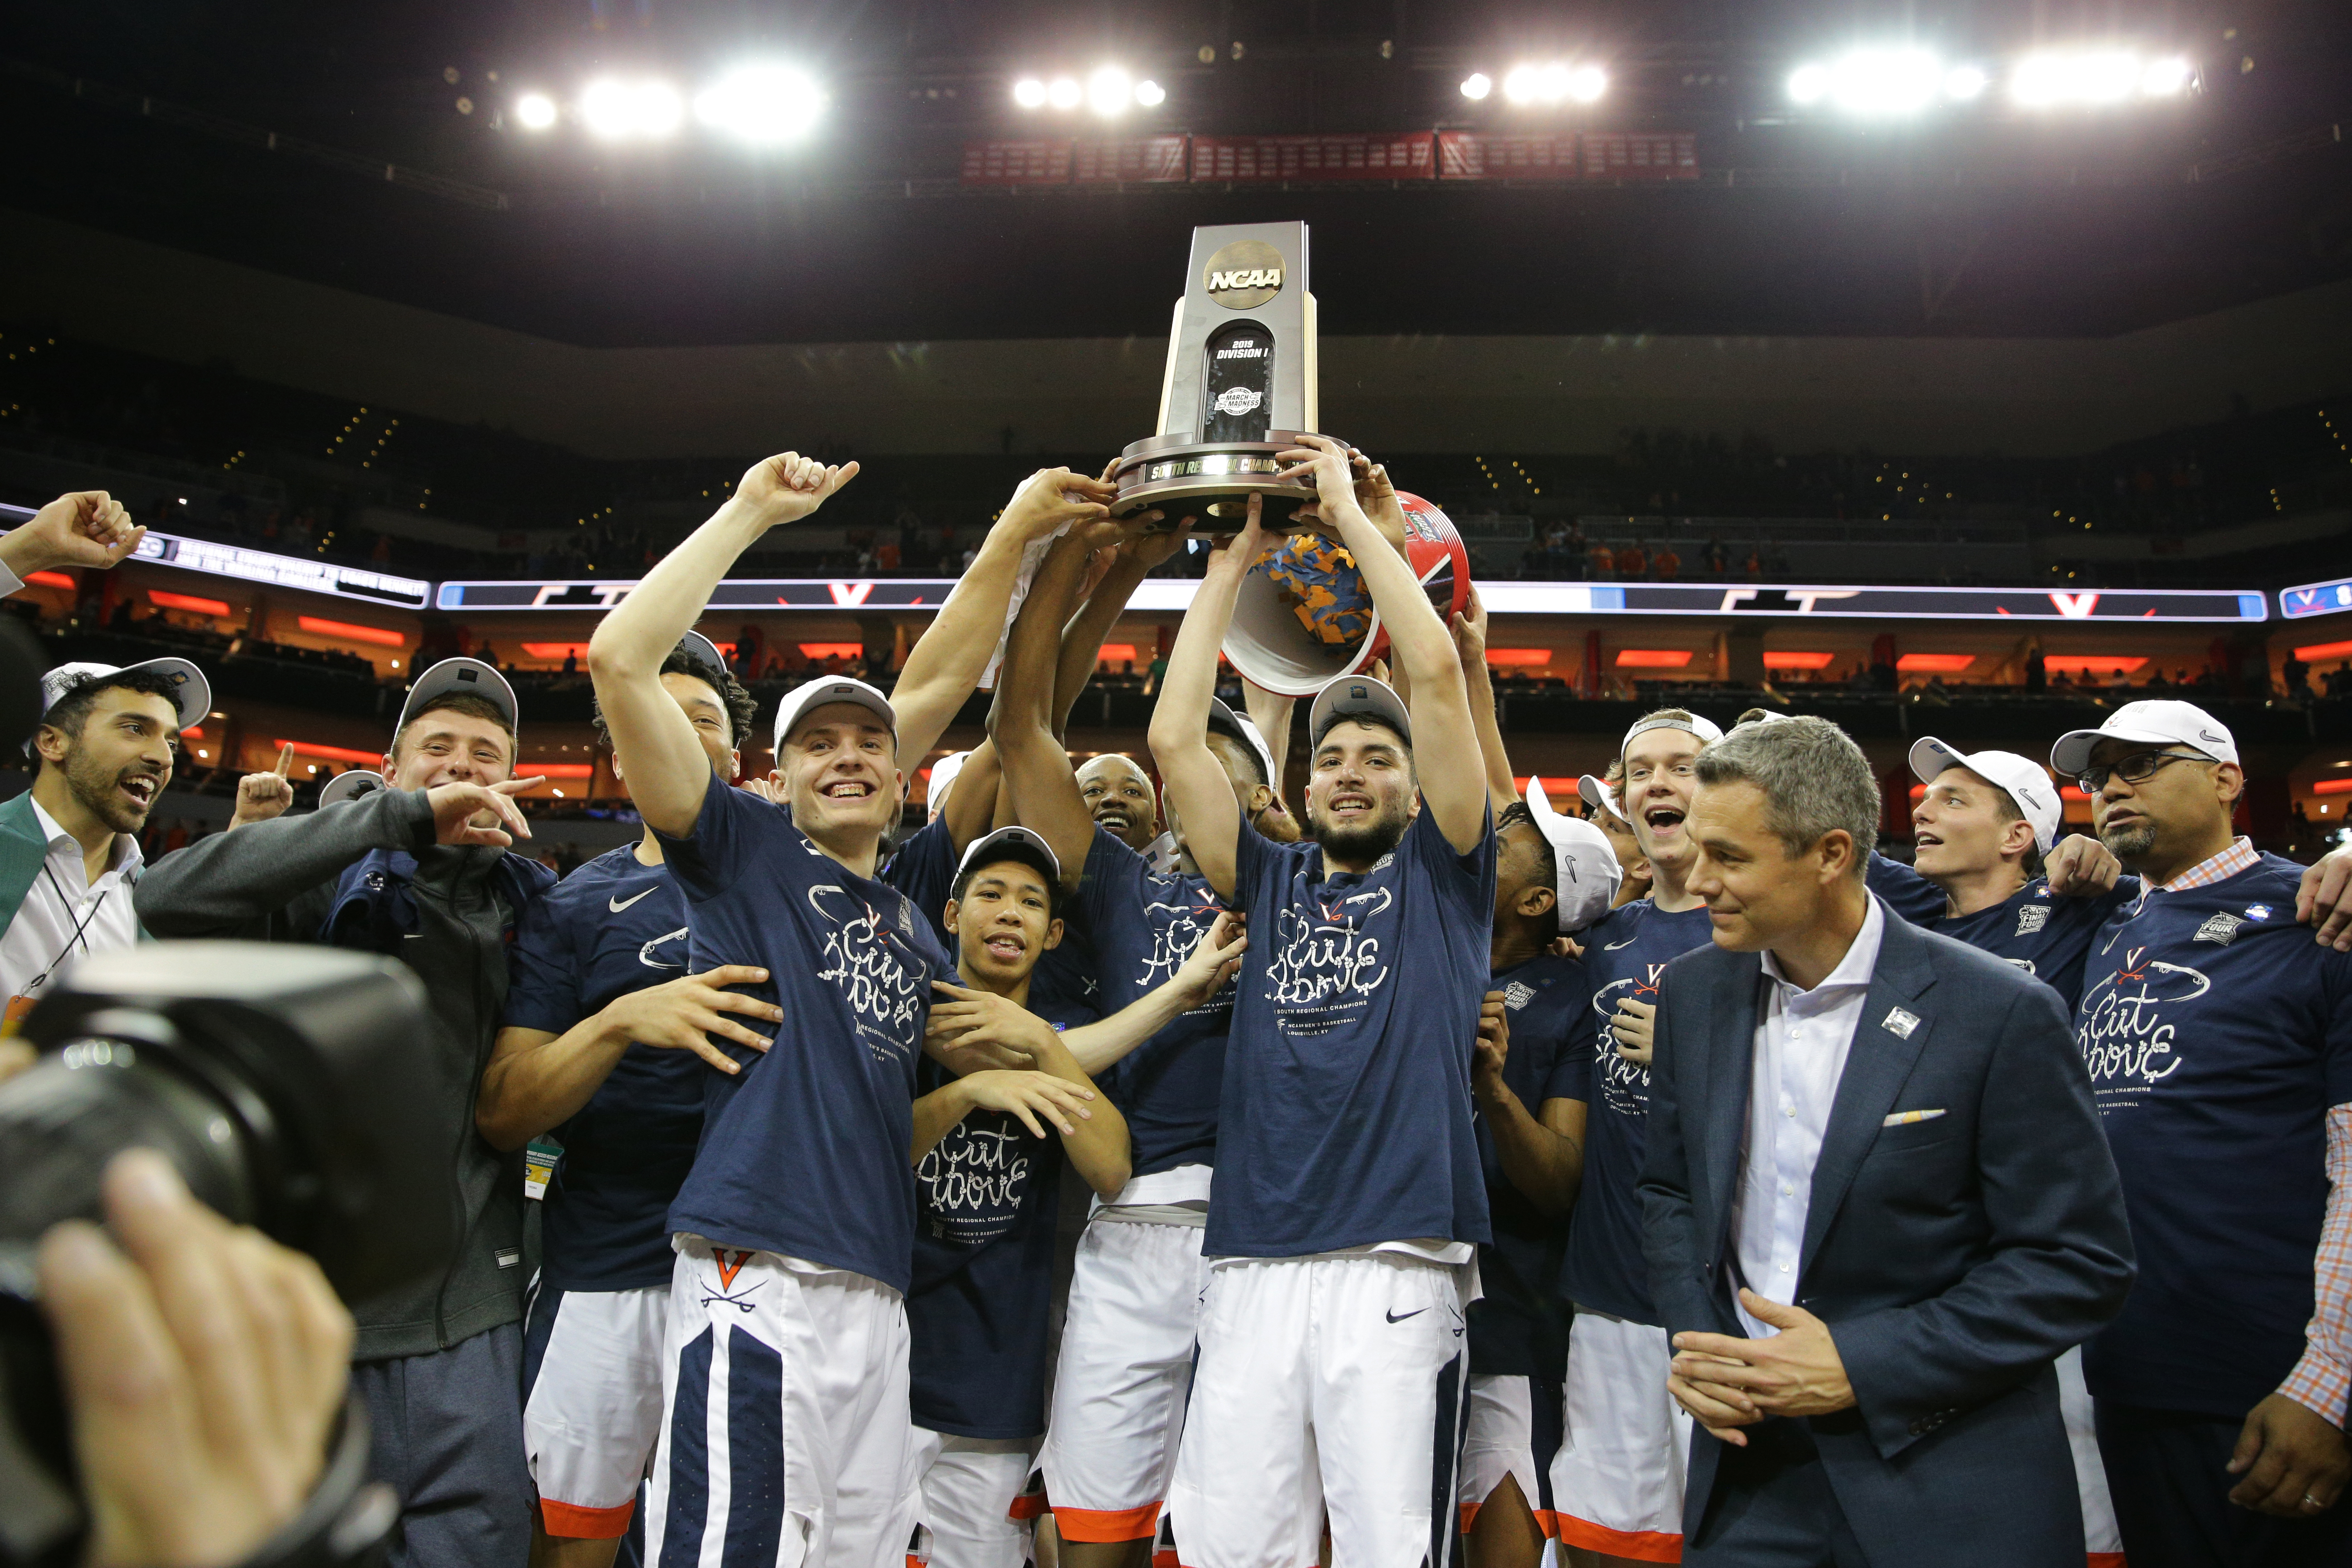 UVA basketball team holds the NCAA trophy above their heads